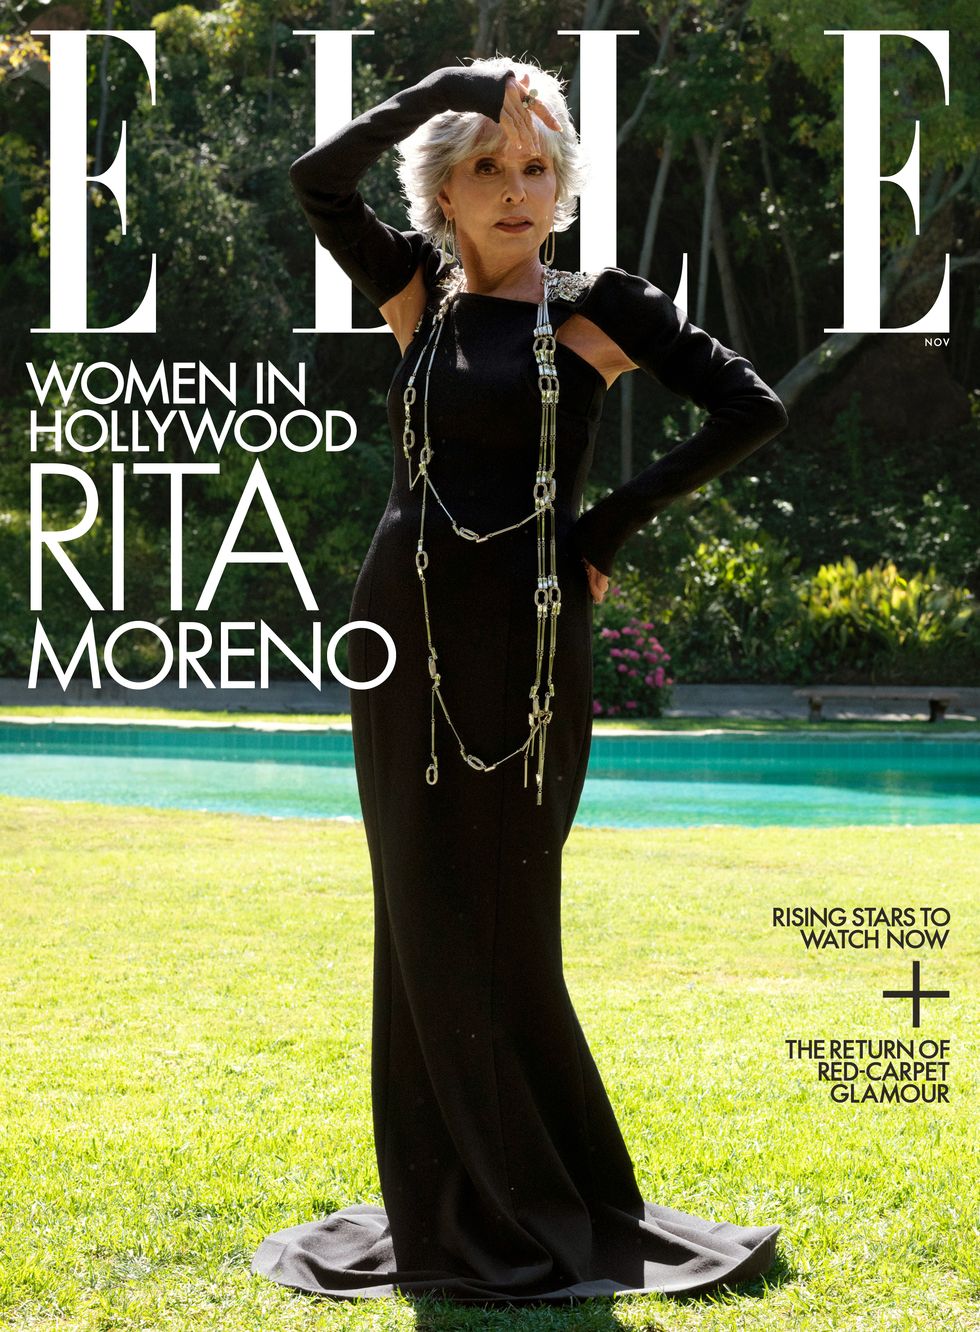 rita moreno stands on grass in front of a swimming pool wearing a dark gown